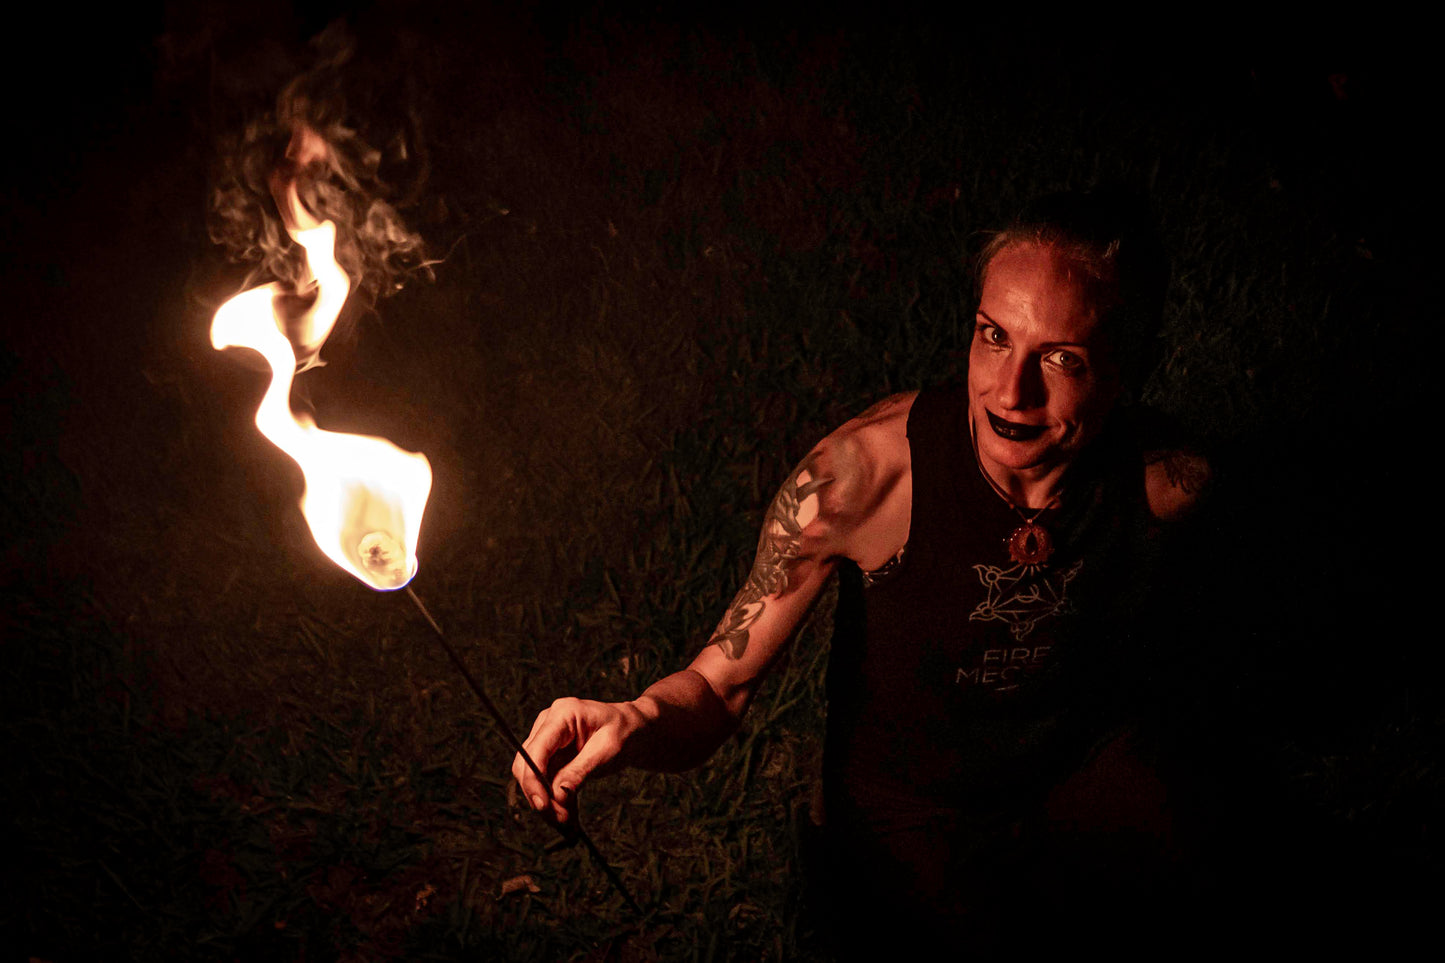 Fire_Eating_Torch_2_Inch_Woven_Kevlar_MoonBlaze_Head_17_Inches_Long_SINGLE_Fire_Breathing_Spitting_Blower_Circus_Flow_Dance_Prop_For_Festivals_Performances_By_FIRE_MECCA